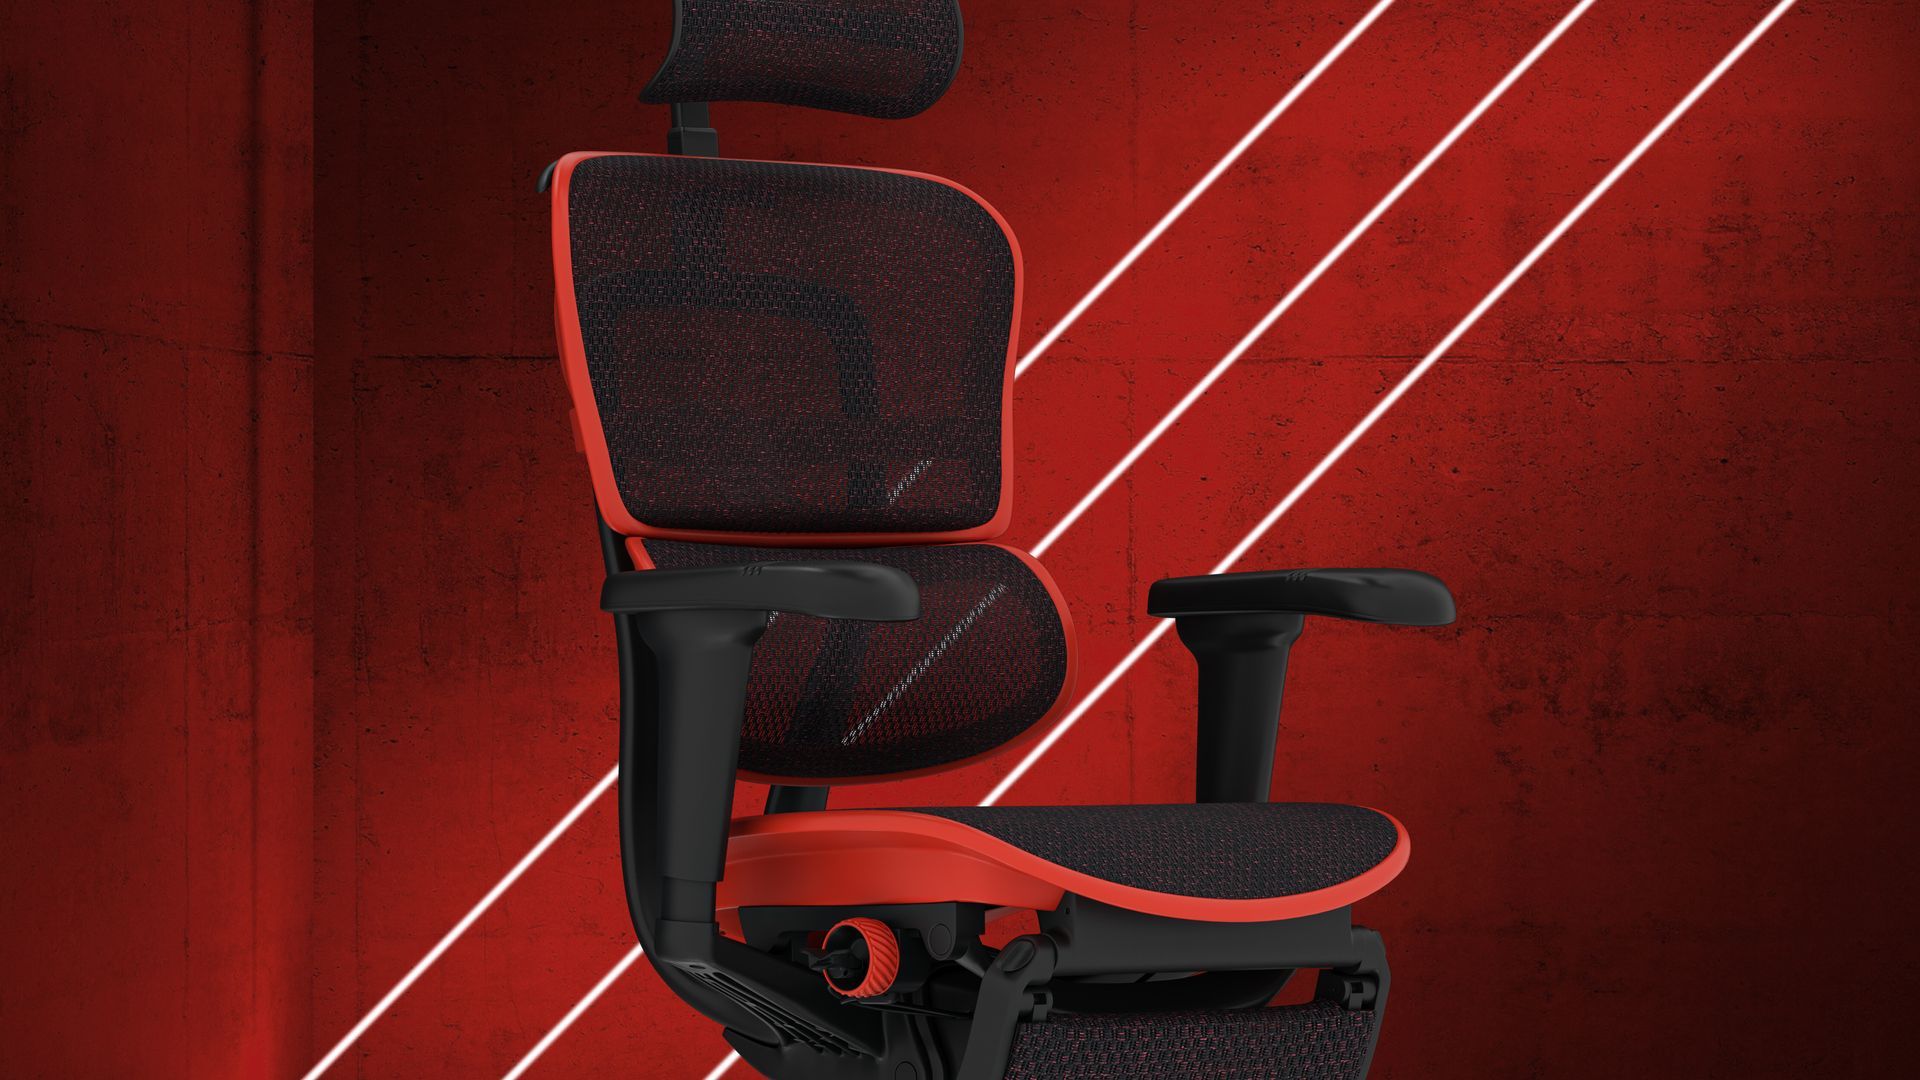 Red frame Ergohuman Carbon gaming chair facing front right. It's in front of a red background with three white diagonal LED strips